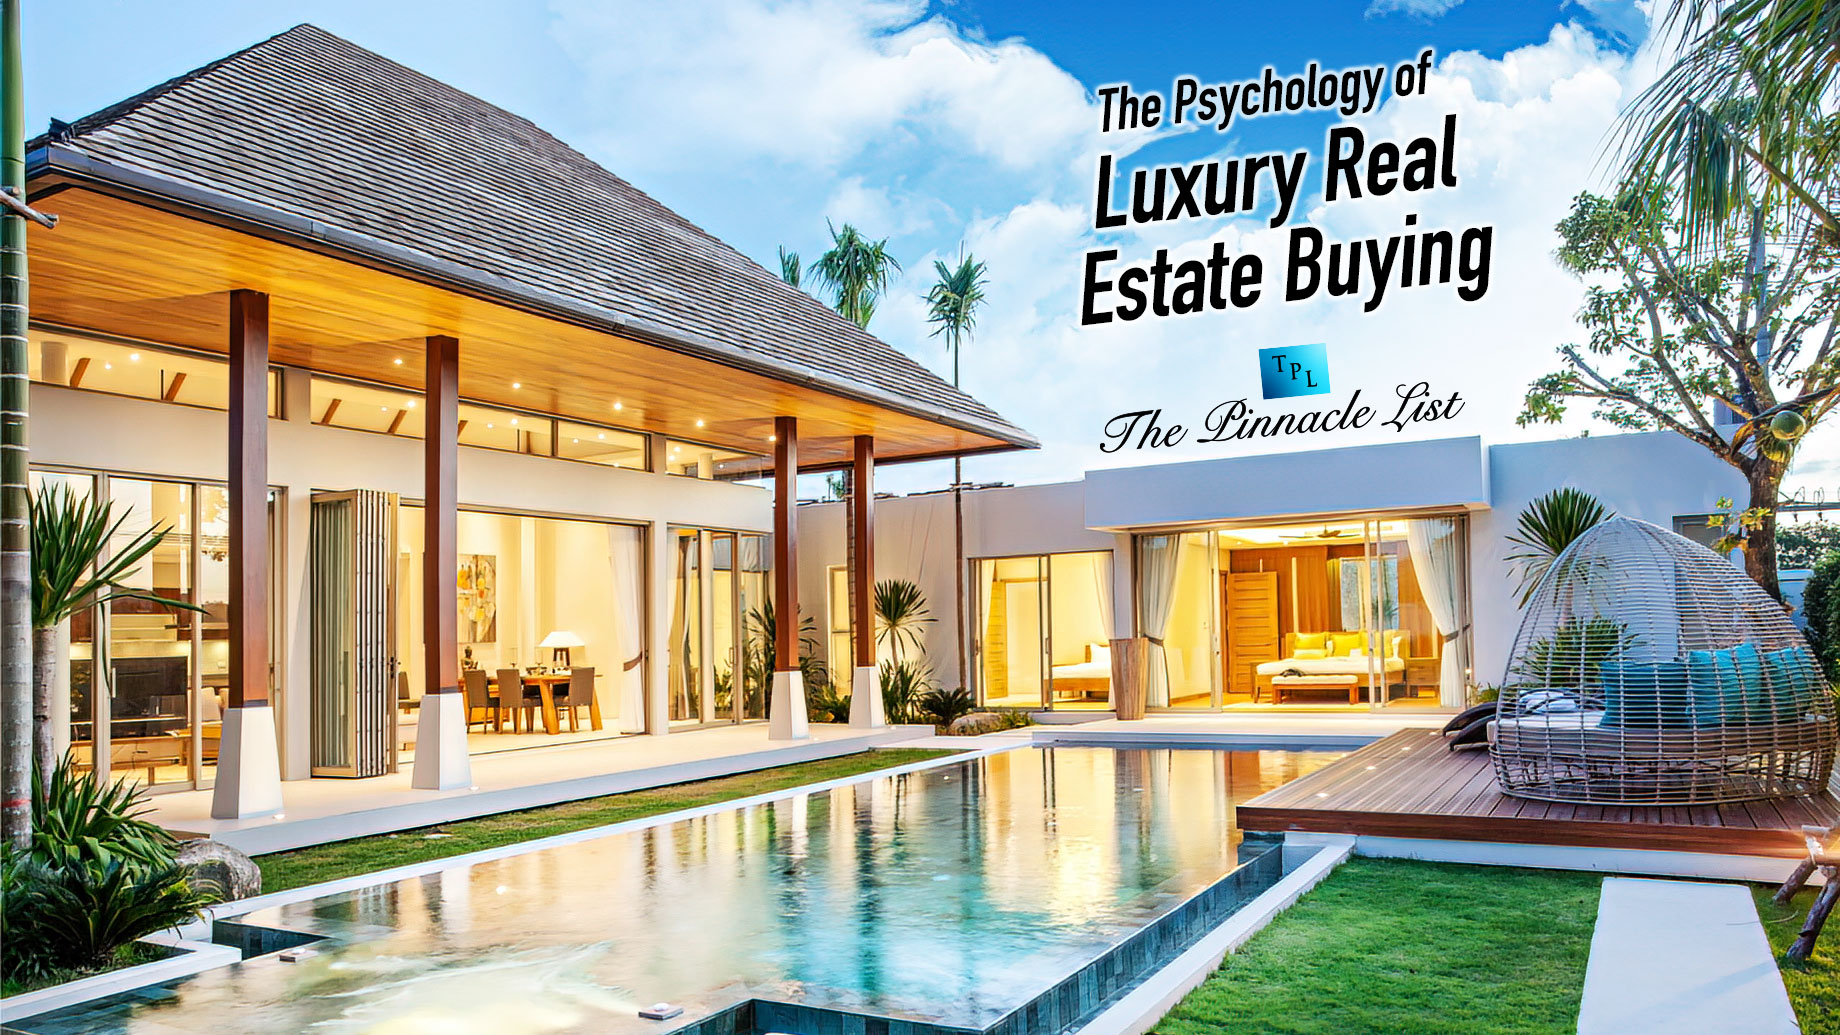 The Psychology of Luxury Real Estate Buying